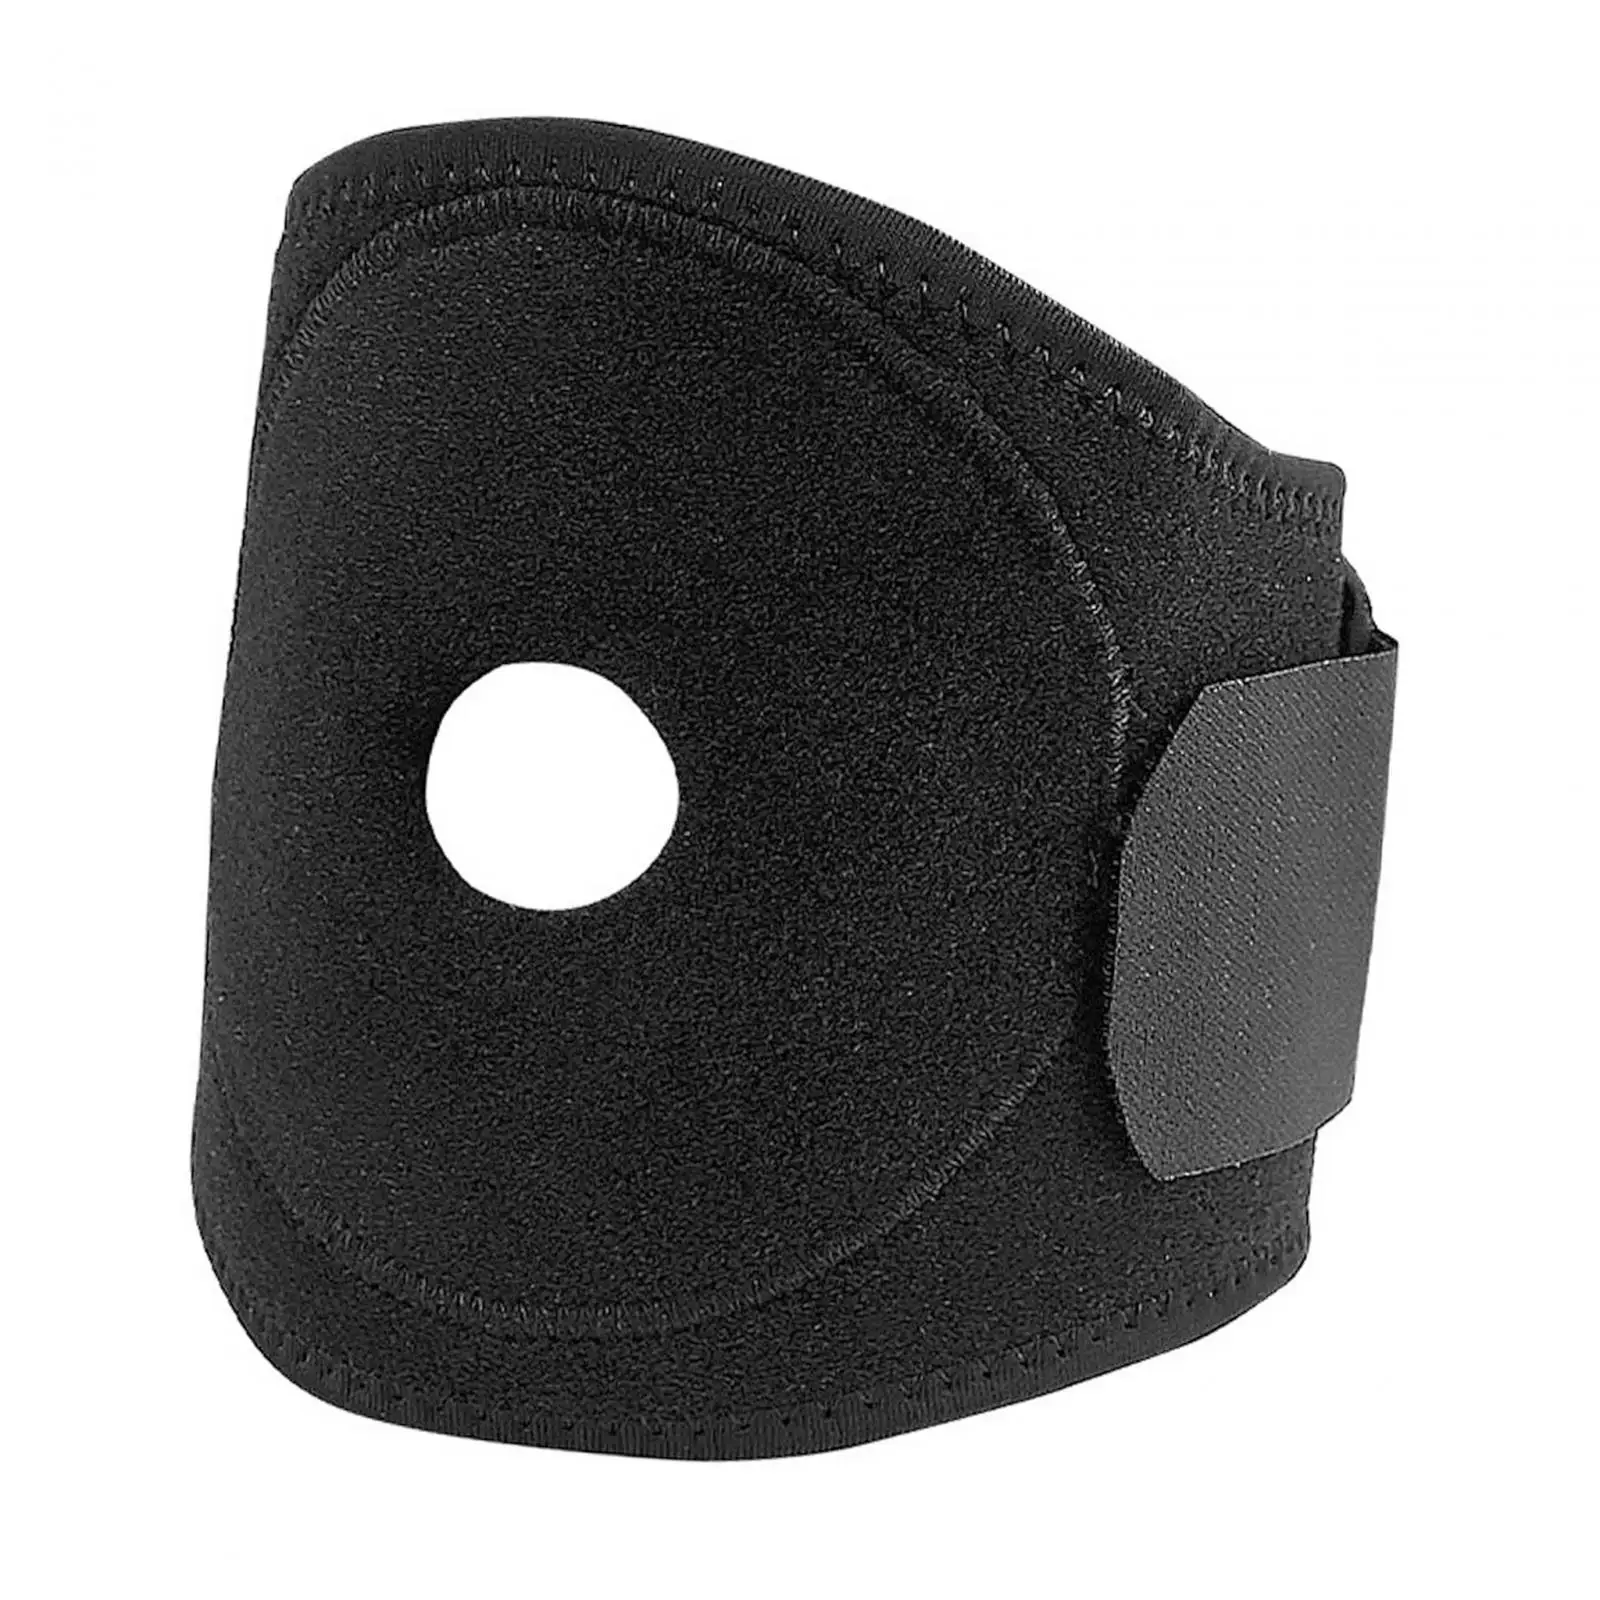 Knee Patellar Pad with Removable Aluminum Plate Thickening Knee Support Sleeve for Running Volleyball Cycling Workout Football